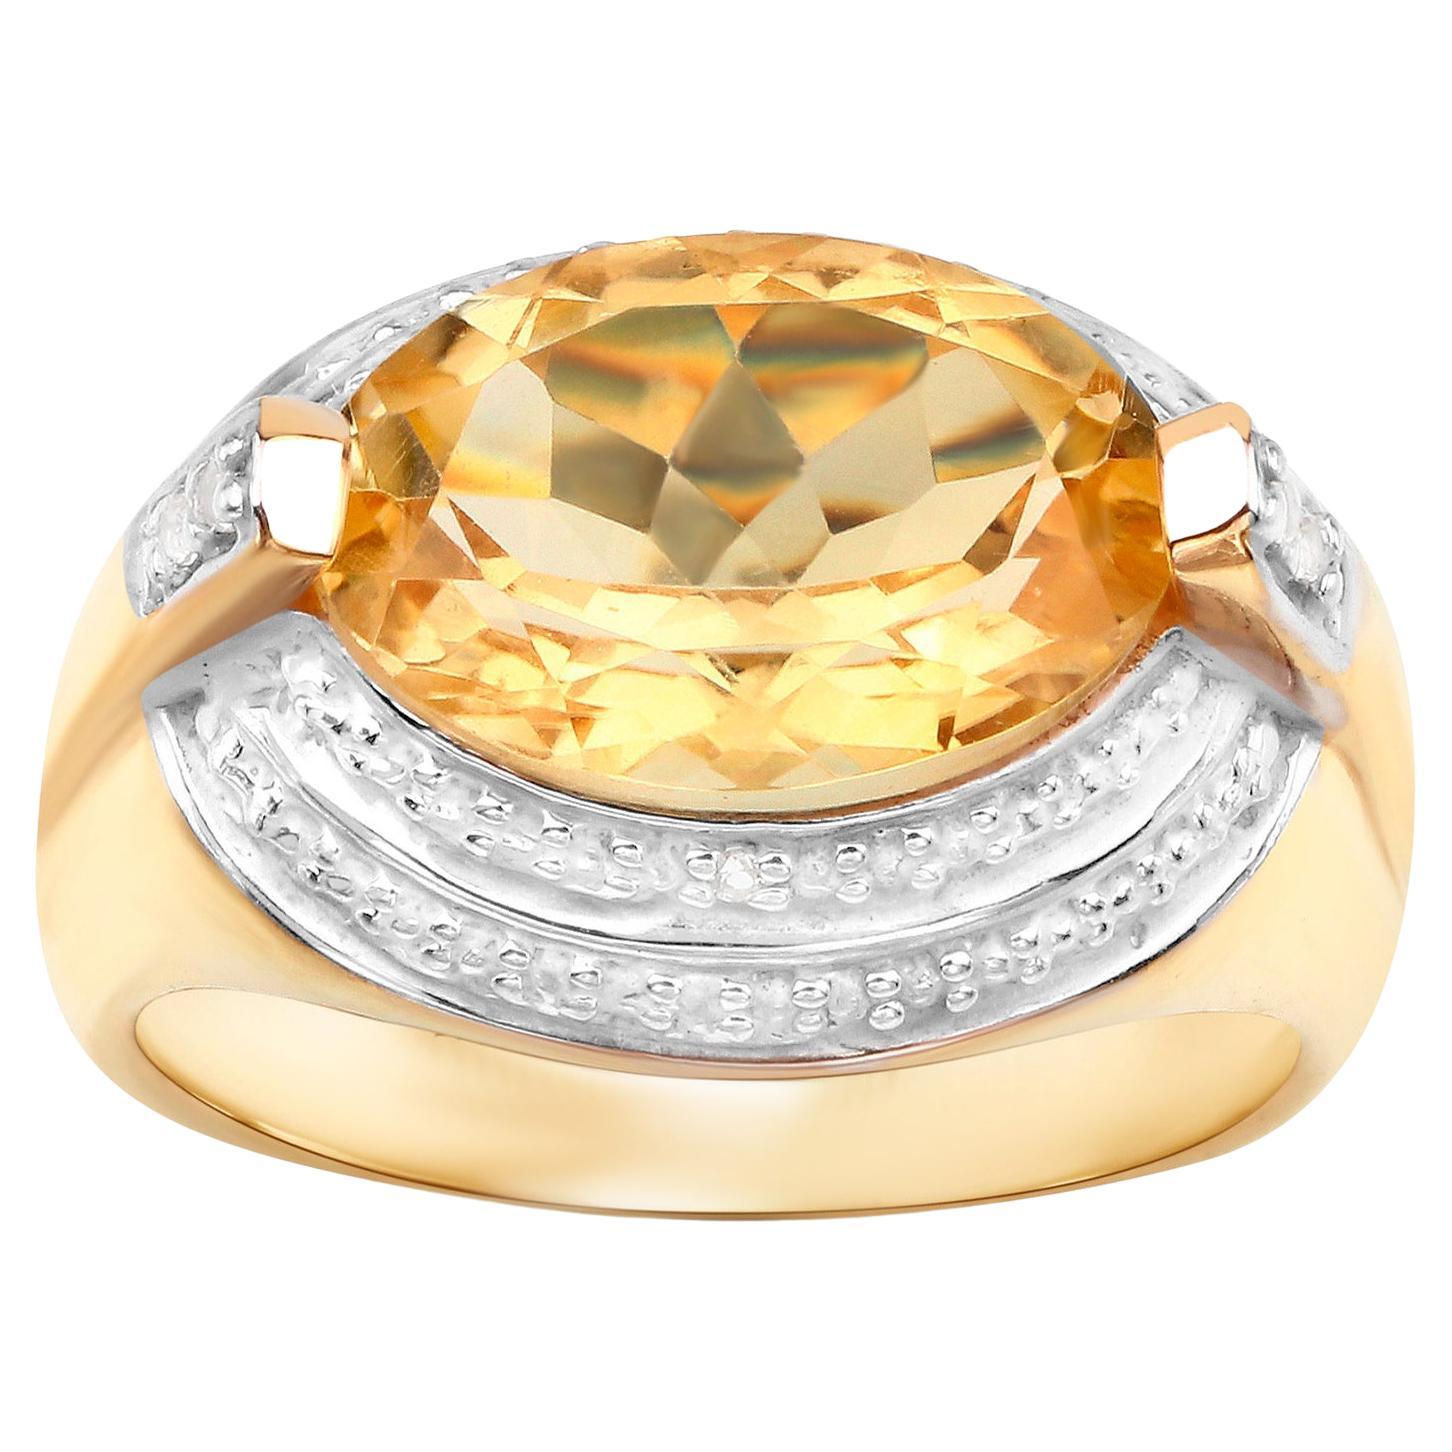 Natural Citrine Ring With Diamonds 4.58 Carats 14K Yellow Gold Plated Silver